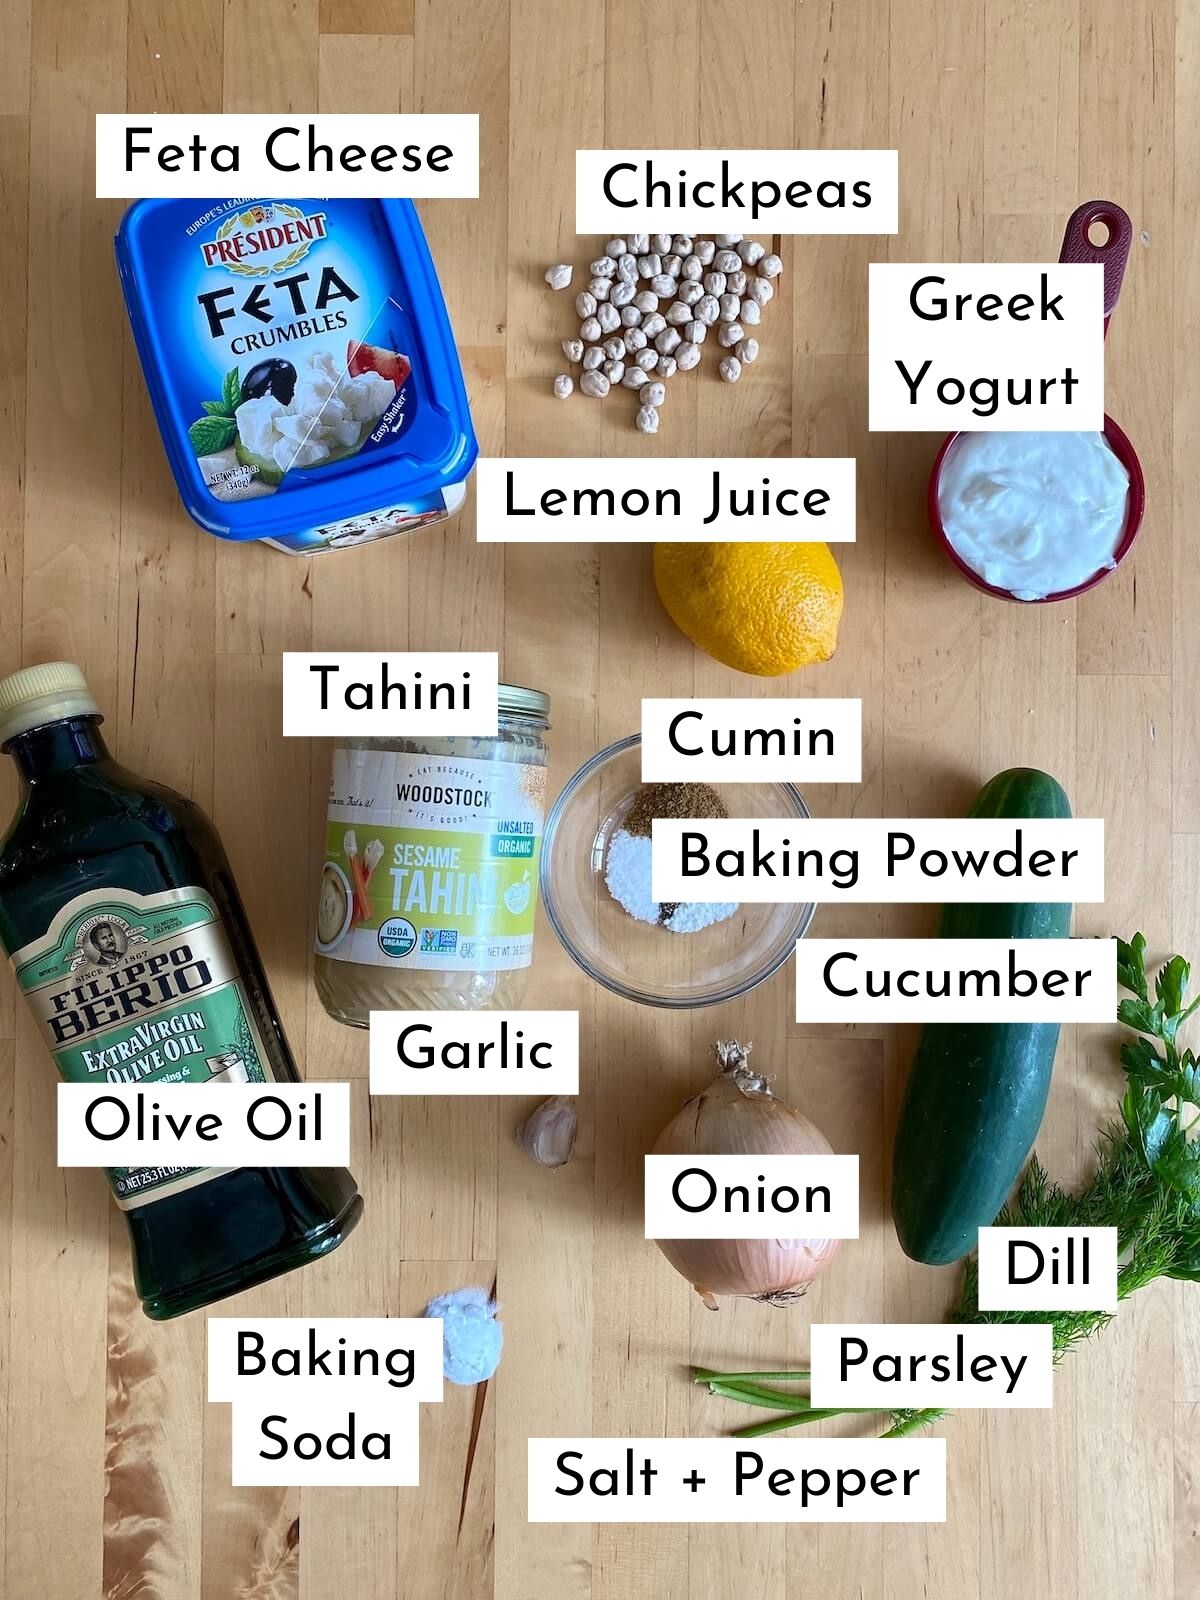 The ingredients to make falafel gyros on a wooden countertop. The ingredients are labeled with text stating what each one is. They include feta cheese, chickpeas, Greek yogurt, lemon juice, tahini, cumin, baking powder, olive oil, garlic, onion, cucumber, dill, parsley, baking soda, salt, and pepper.